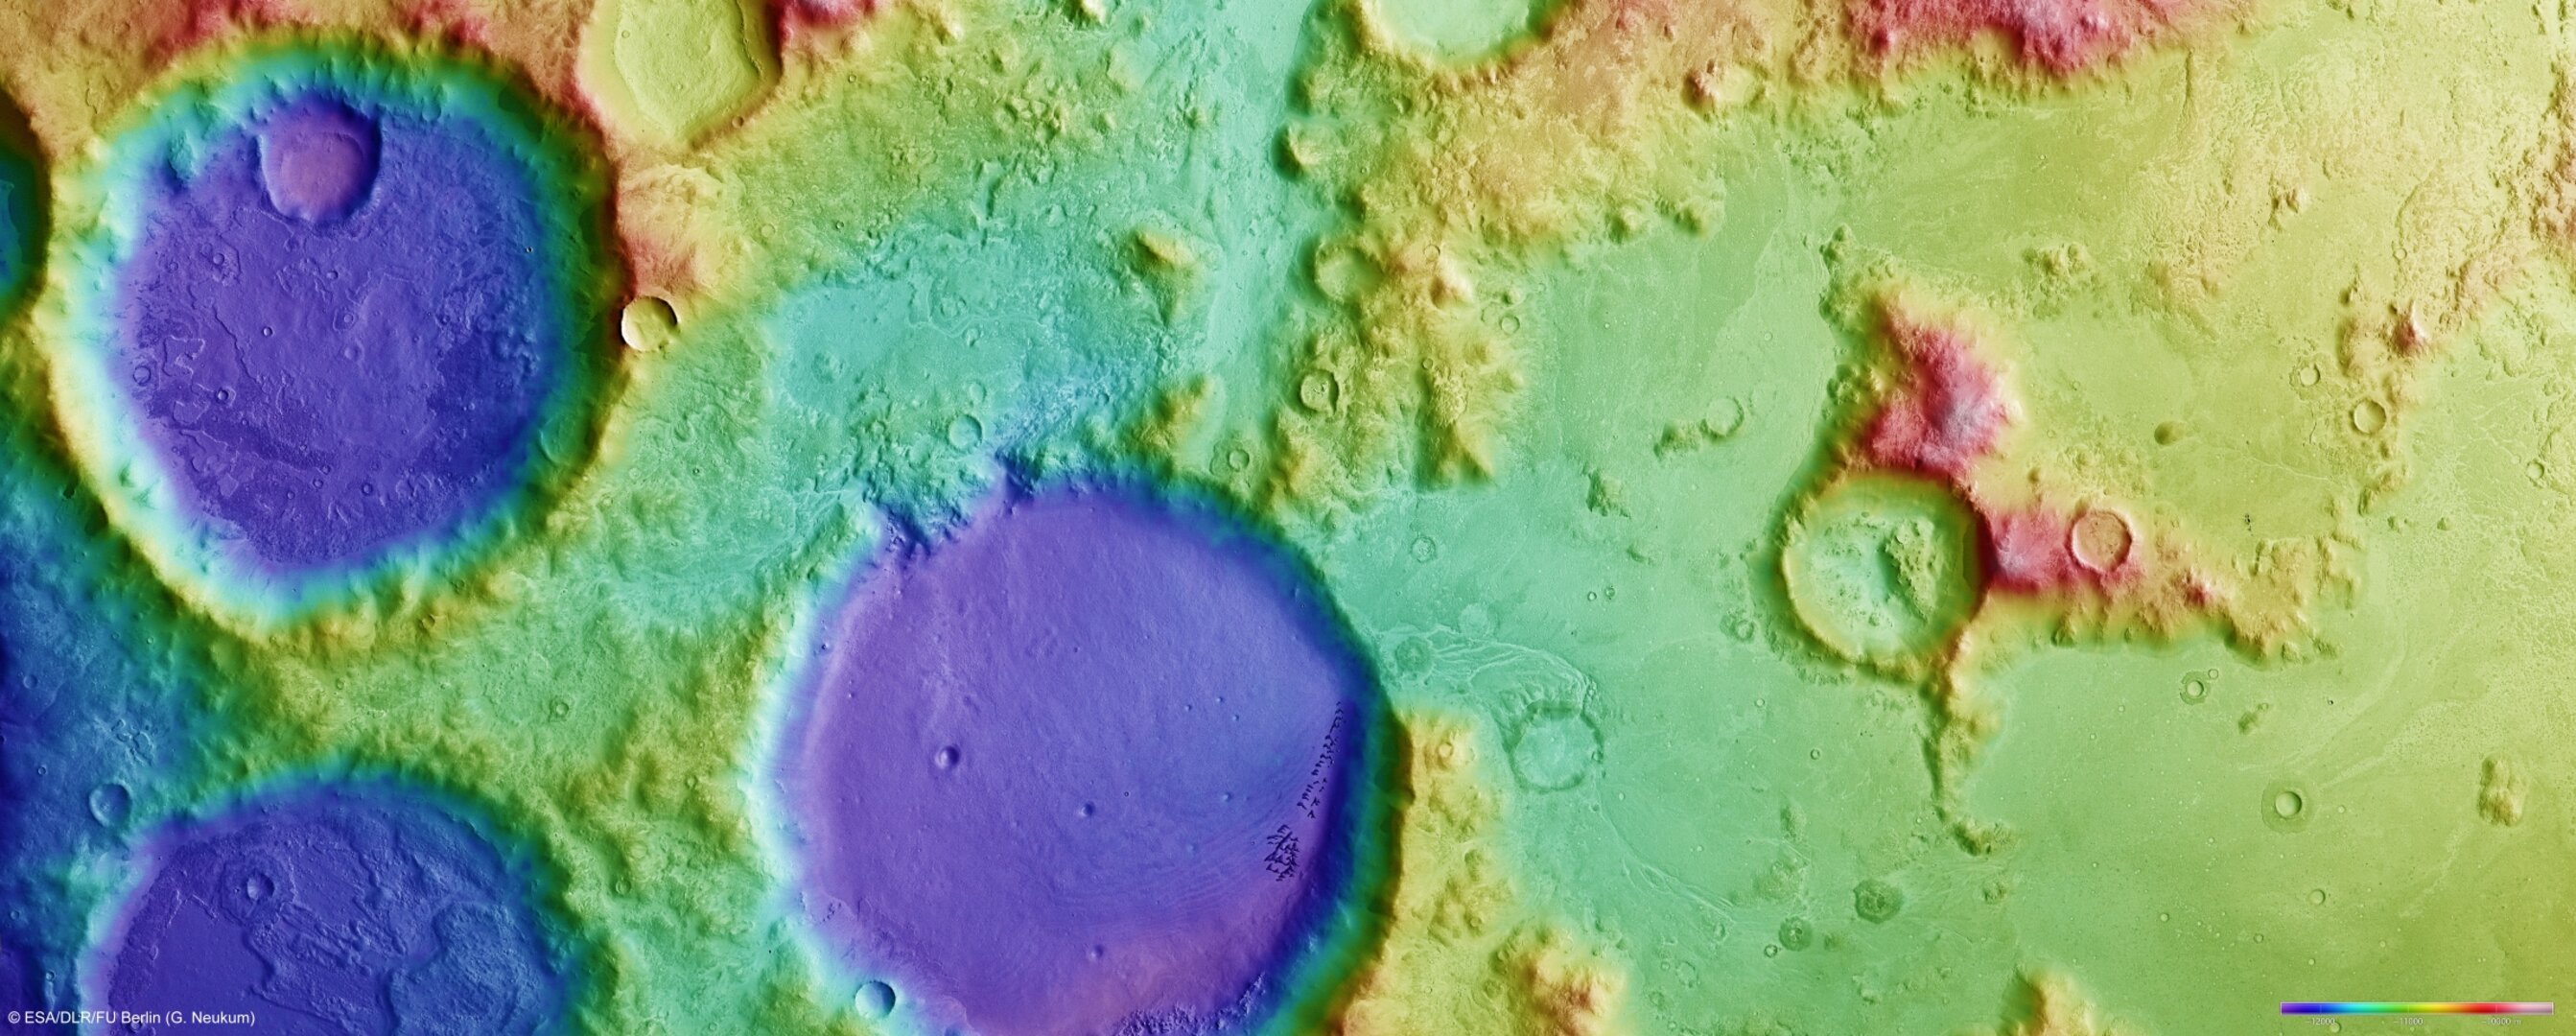 Topographic view of Charitum Montes